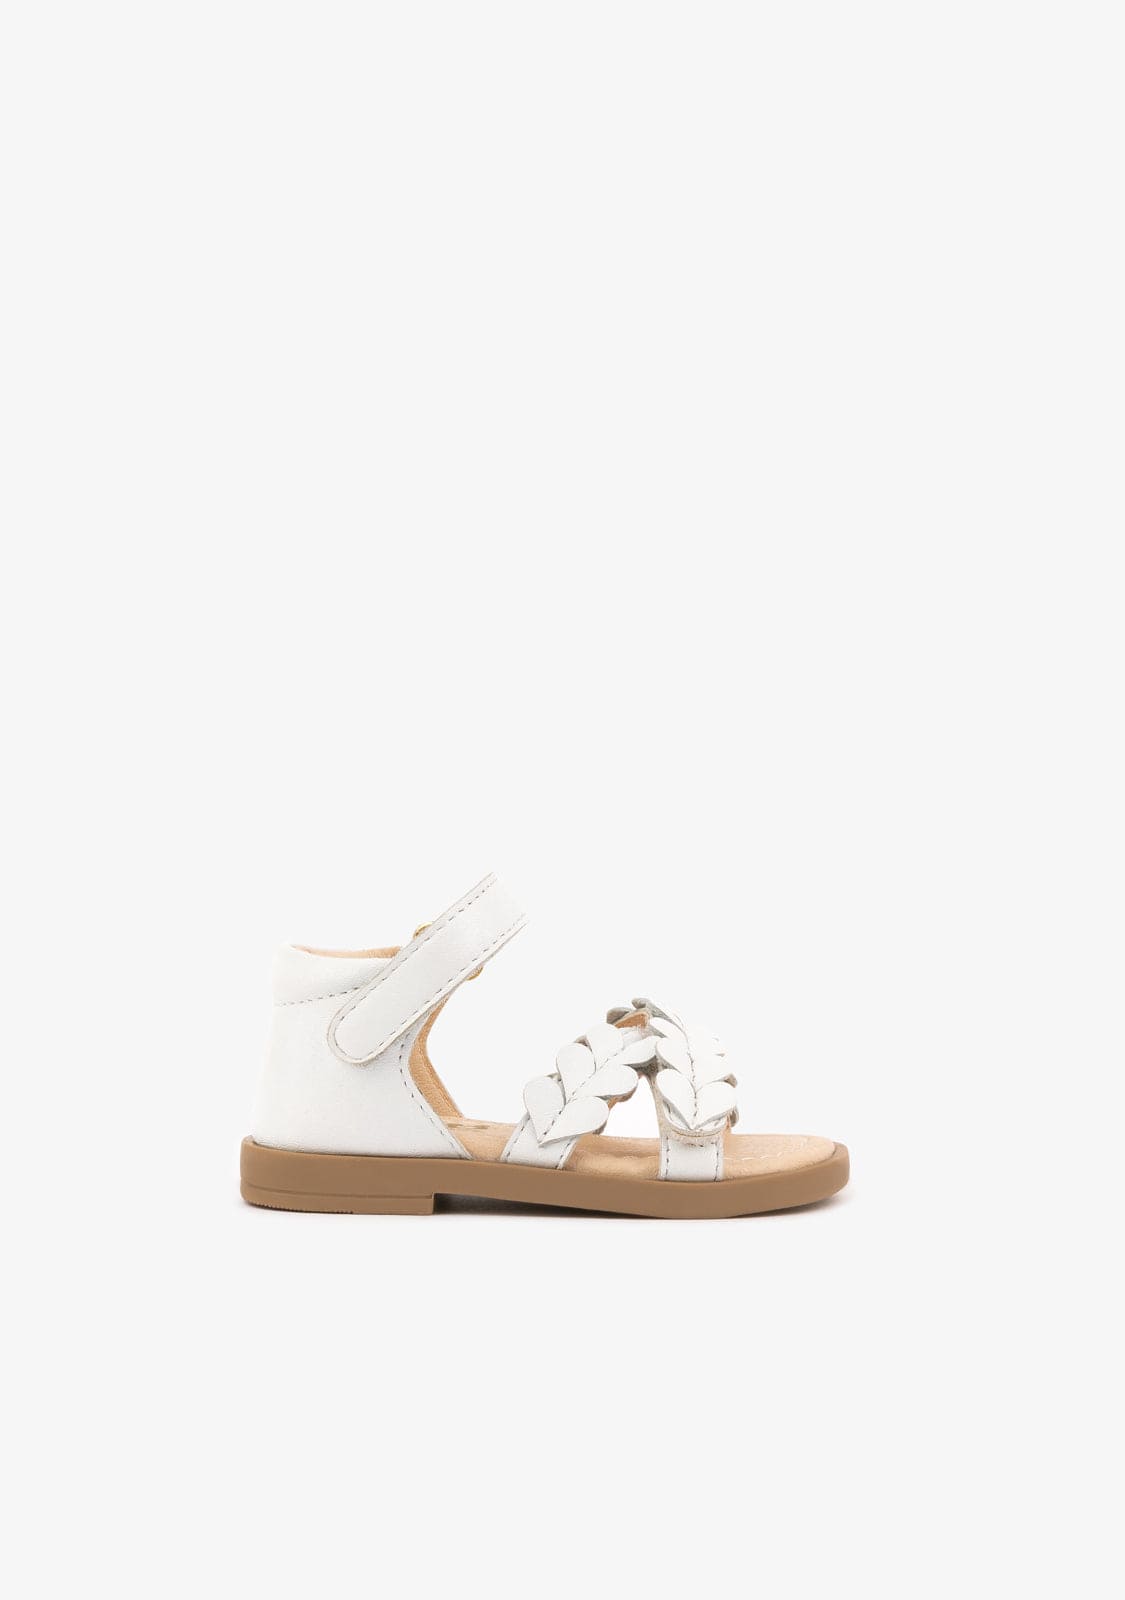 OSITO Shoes Baby's White Sandals Napa